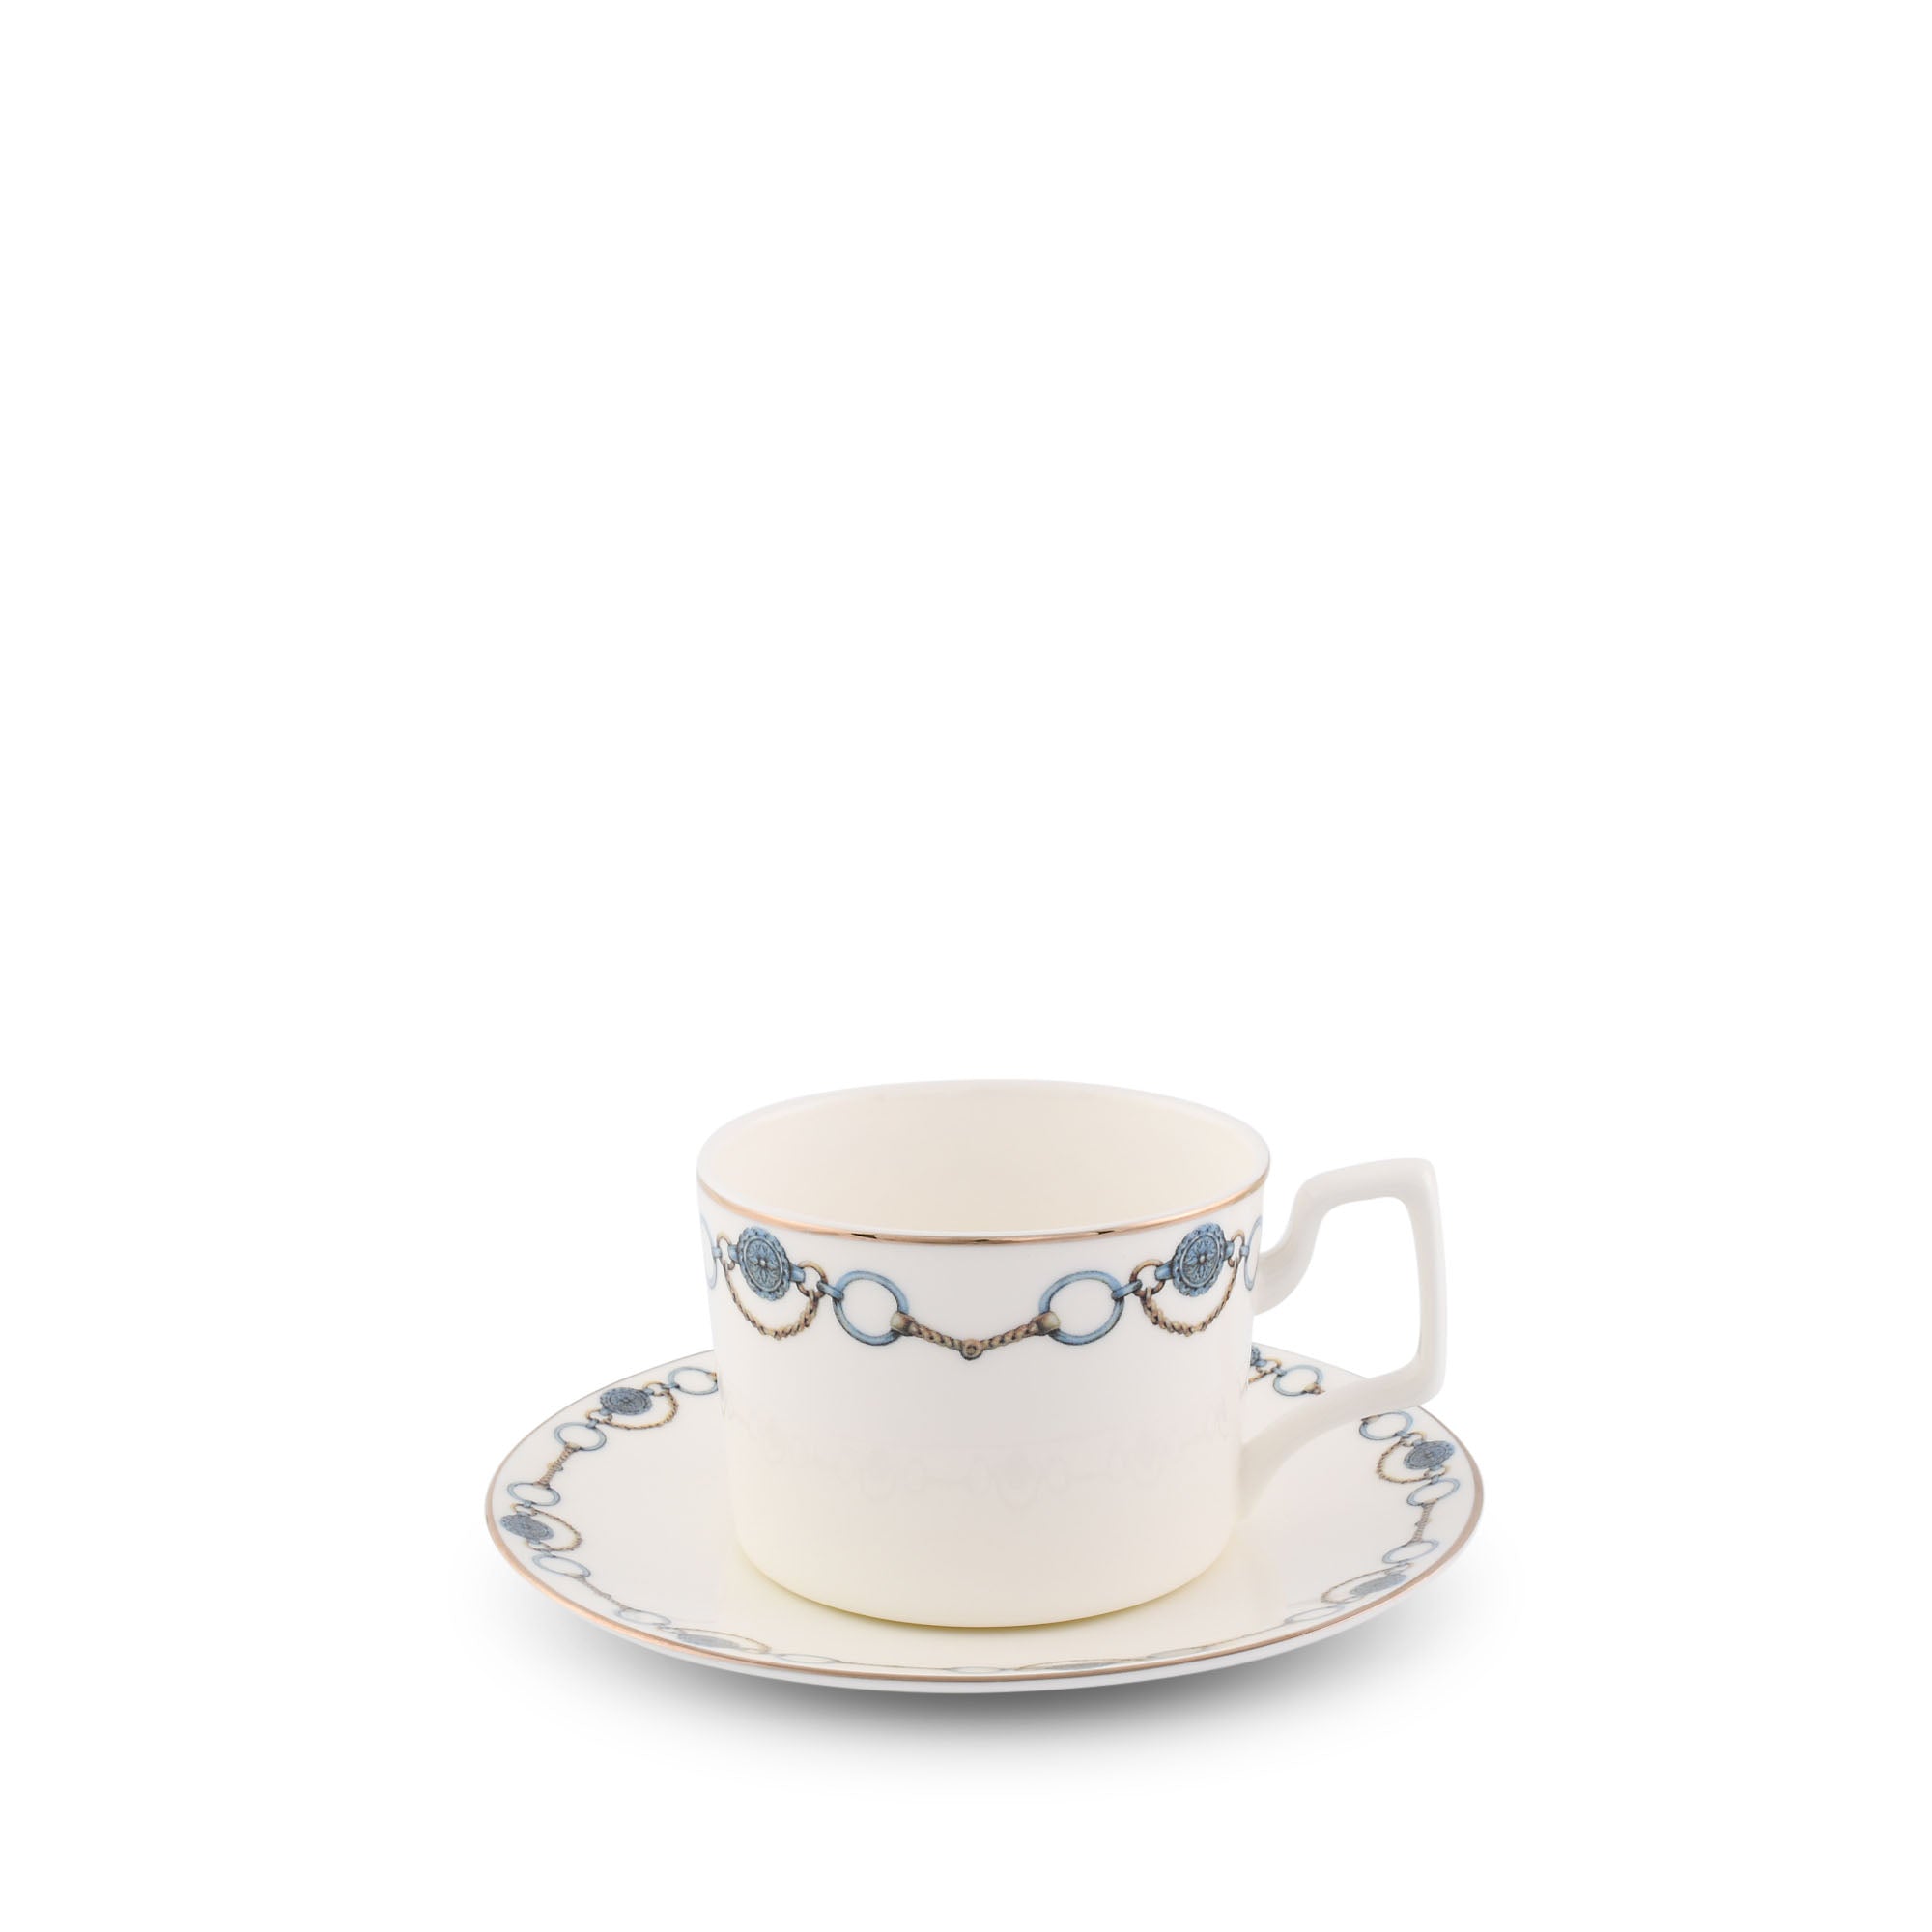 Vagabond House Amarillo Concho Pattern Bone China Cup and Saucer Product Image